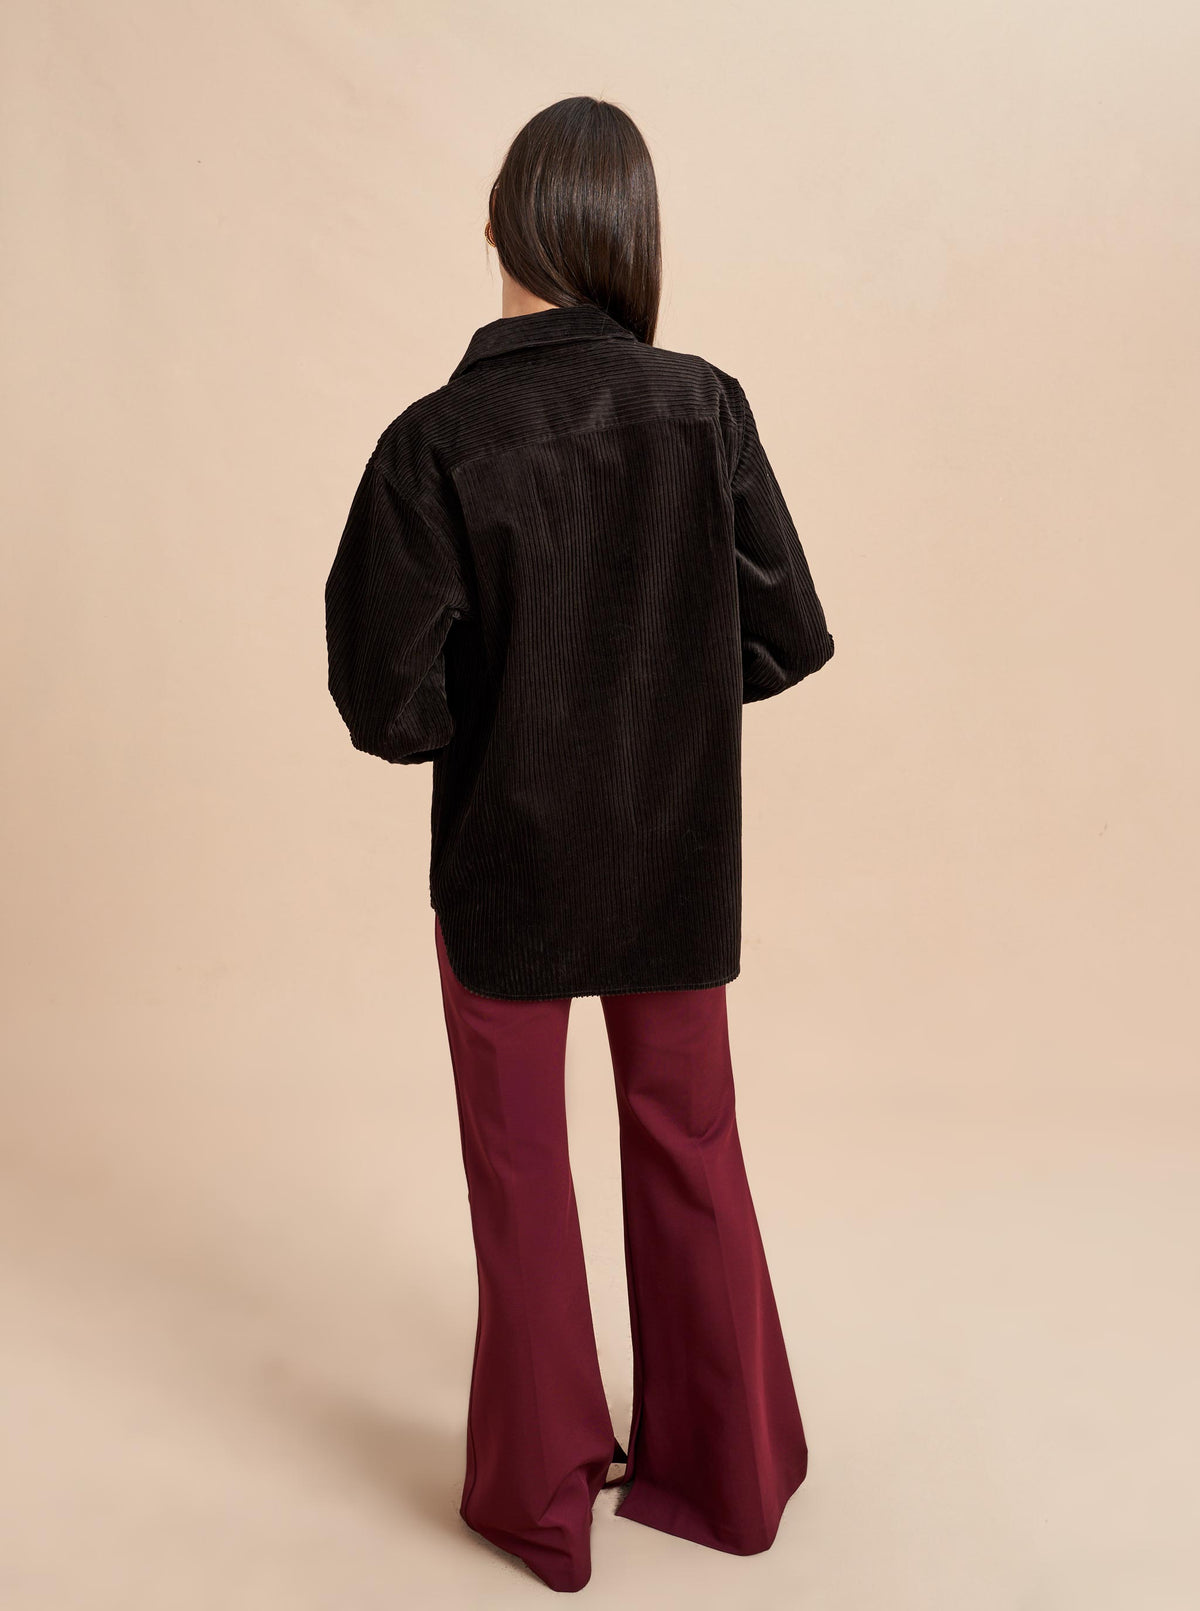 The perfect oversize shirt in delicious cotton-stretch corduroy will become your go-to outwear choice. Wear it on its own, with its matching pant or layered over a sweater, this wide wale jacket is where functionality meets luxury and turns to obsession.